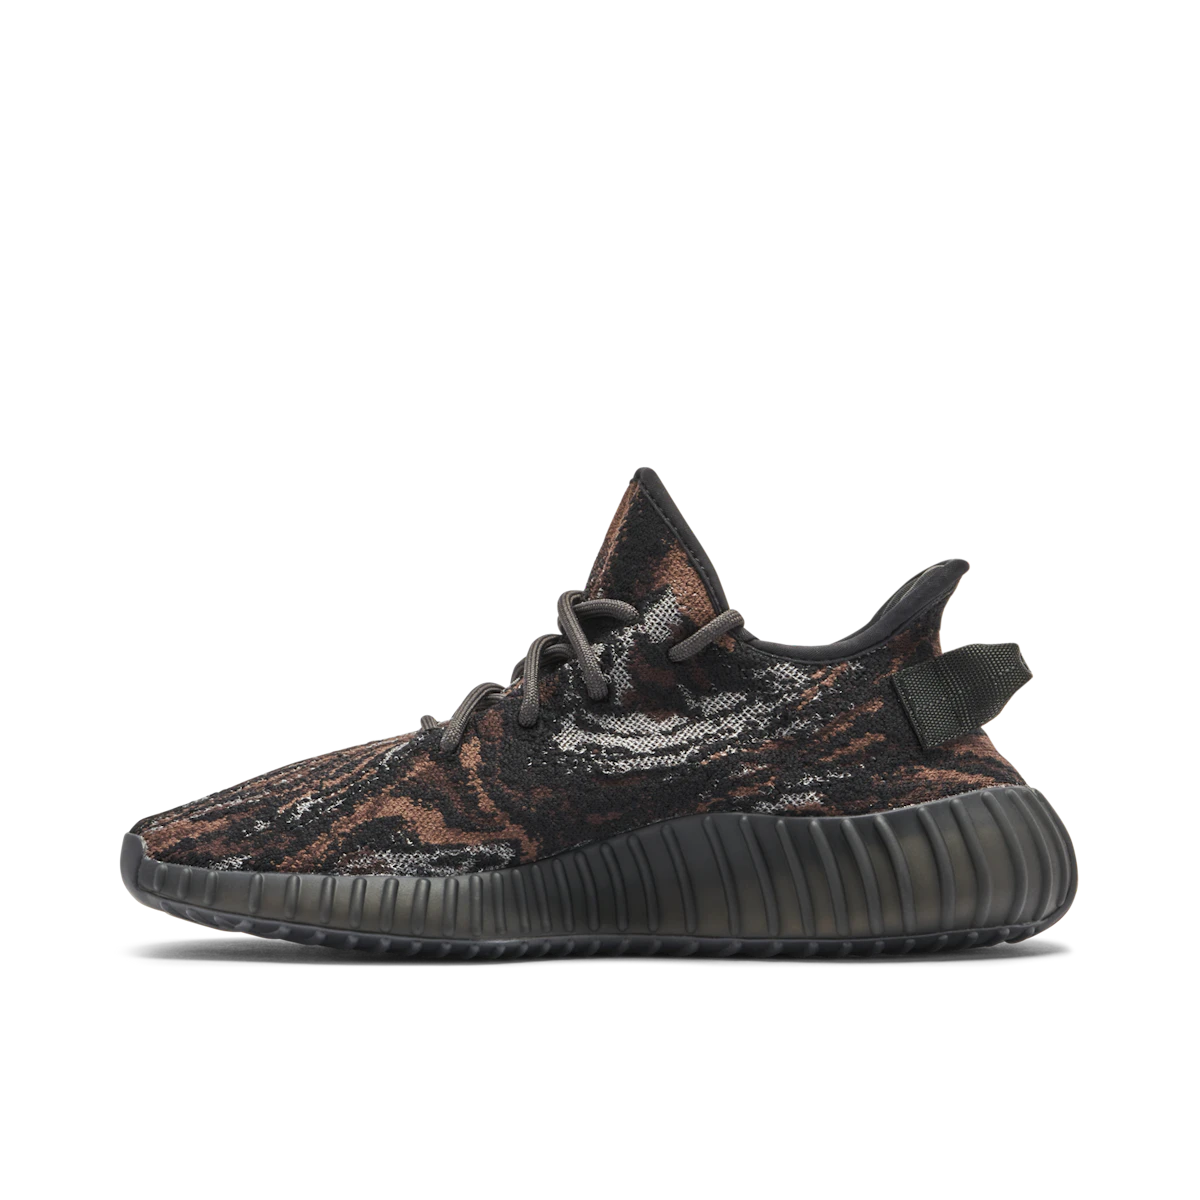 Adidas Yeezy Boost 350 V2 MX Rock by Yeezy from £270.00